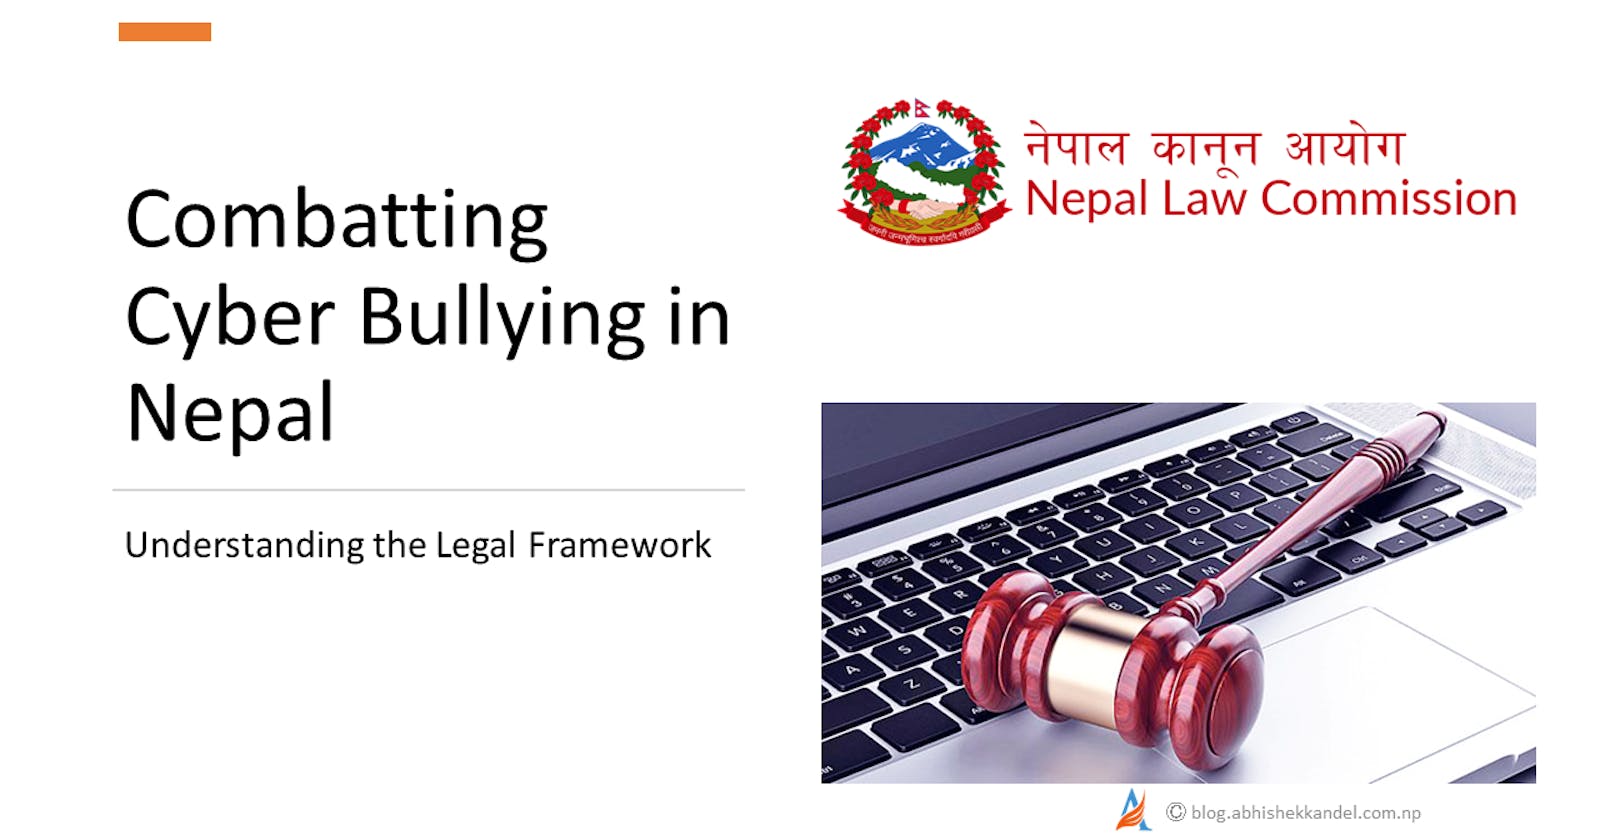 Addressing Cyber Bullying in Nepal: Legal Framework and Effective Strategies